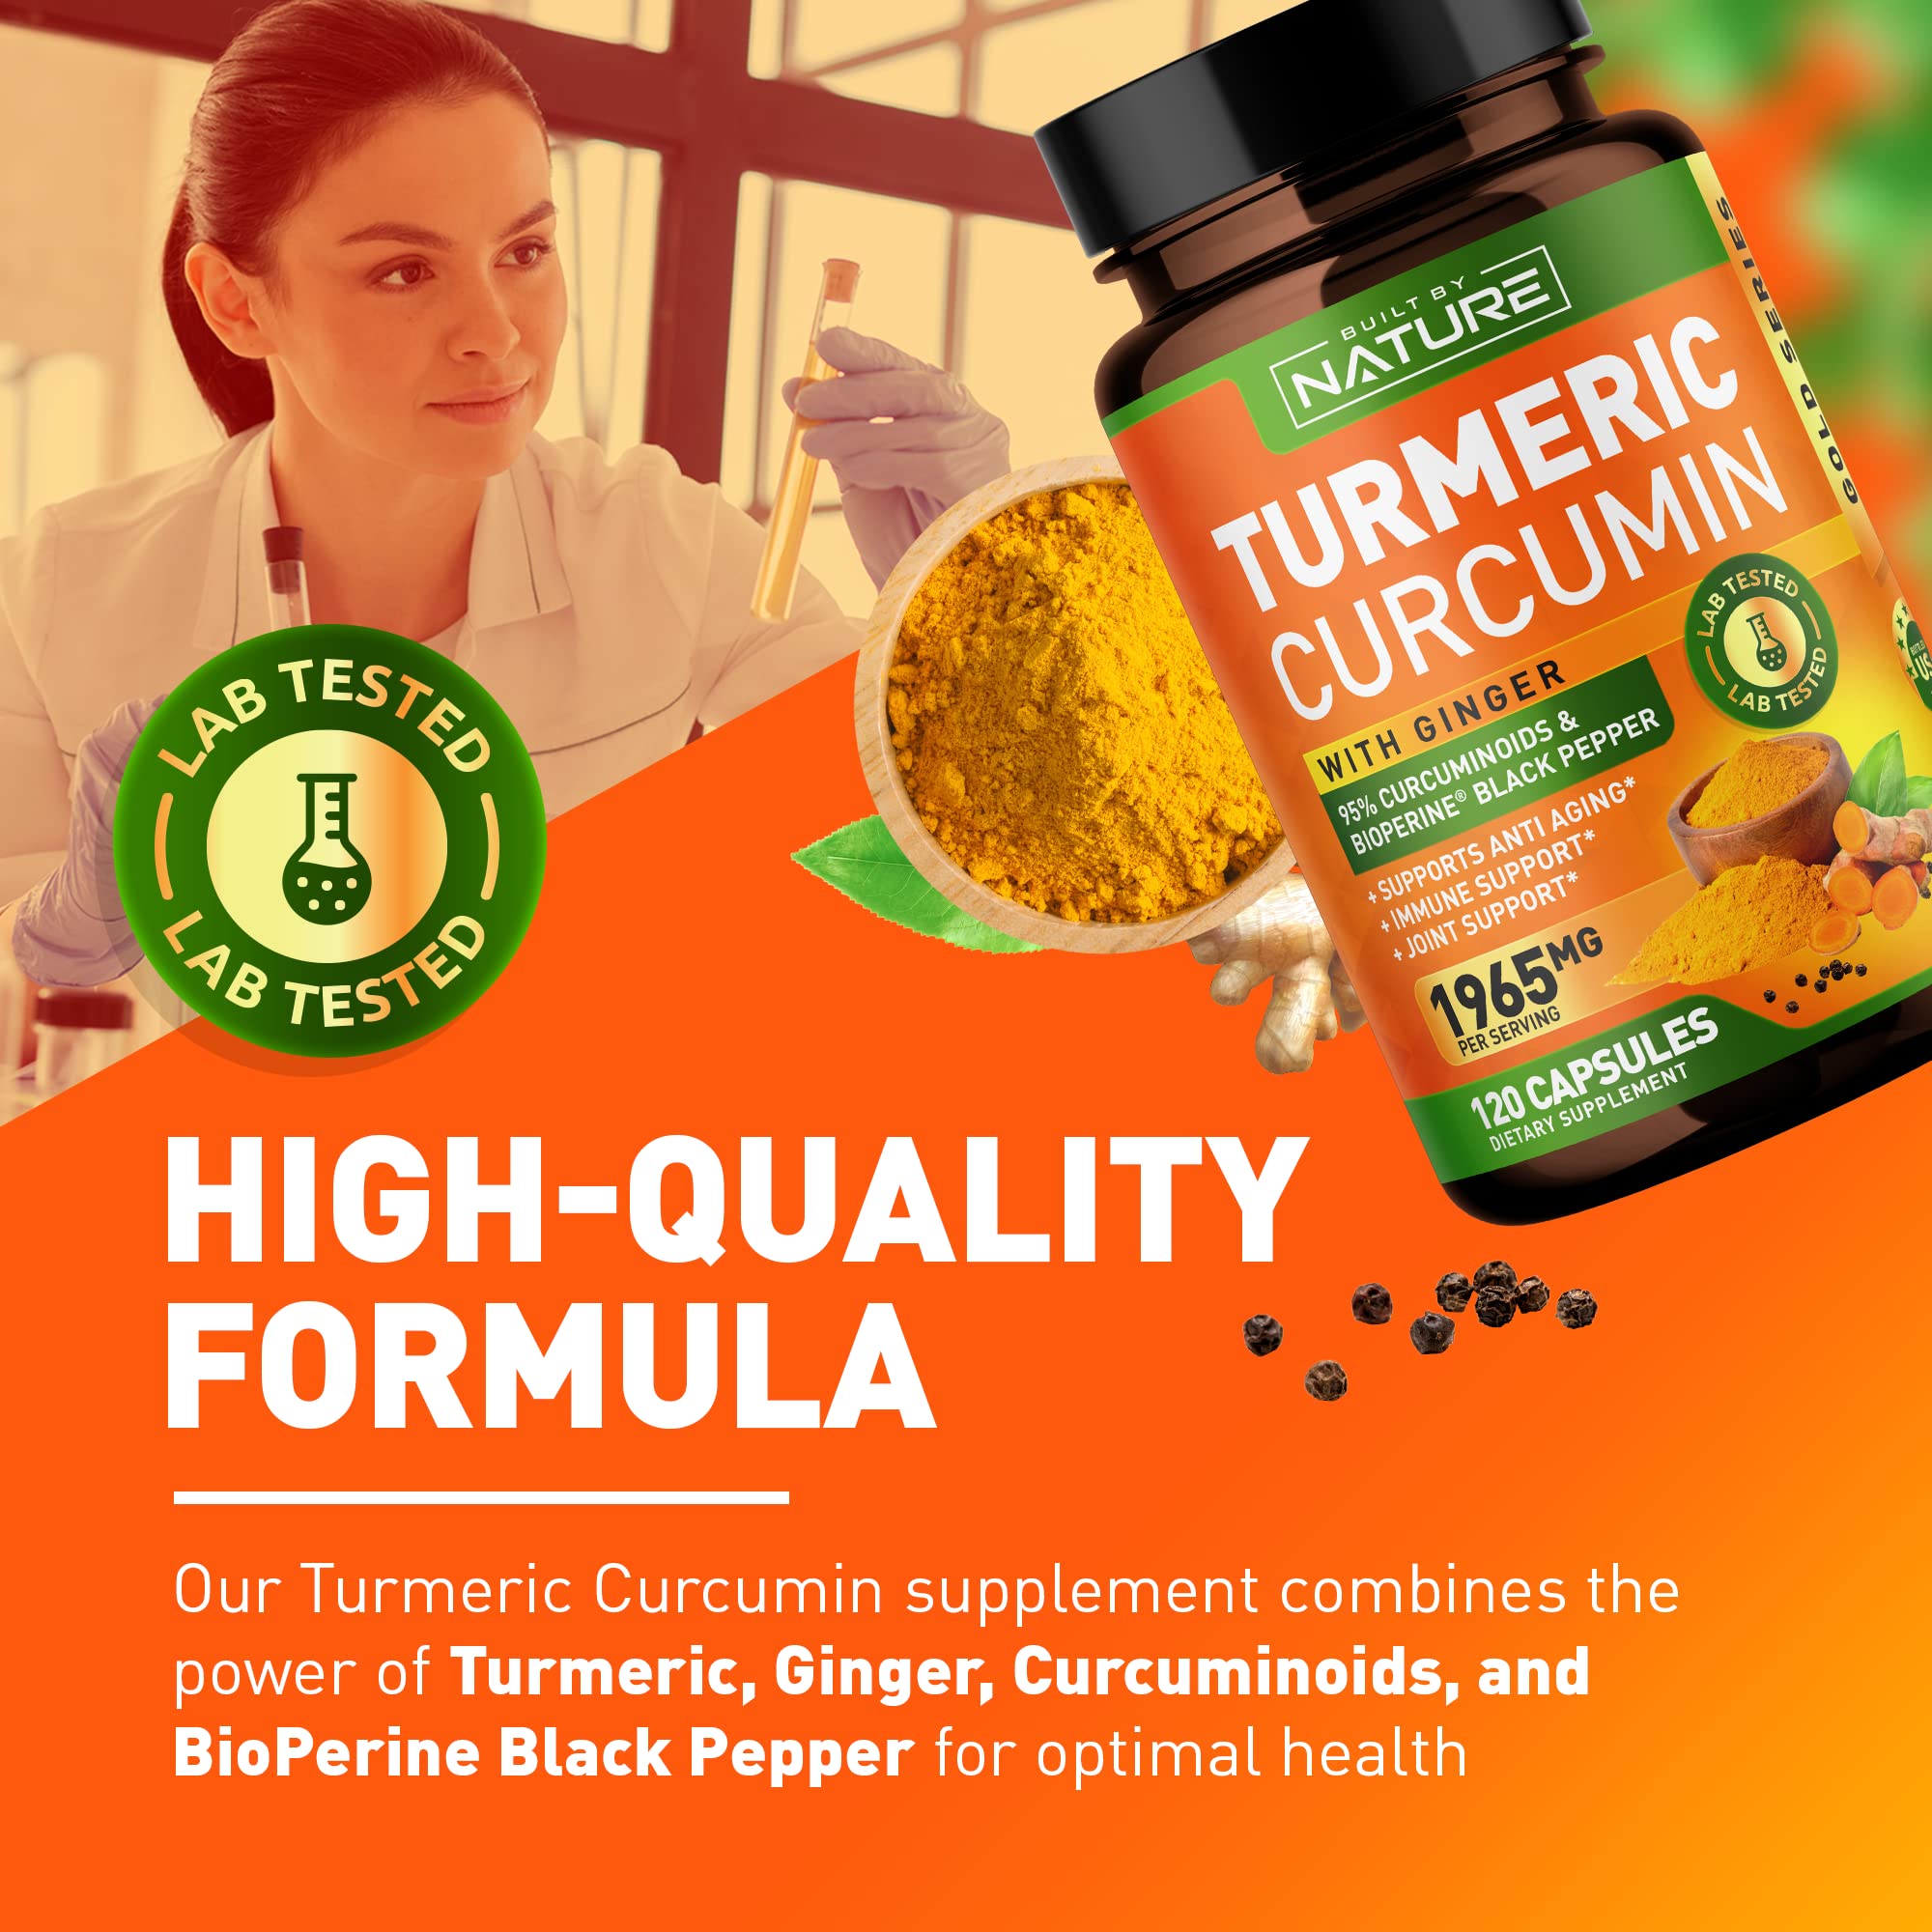 Turmeric Curcumin 1965mg with Ginger & BioPerine Black Pepper Extract - High Absorption 95% Curcuminoids for Joint & Antioxidant Support - Non-GMO, Gluten-Free, Vegan - 120 Herbal Supplement Capsules